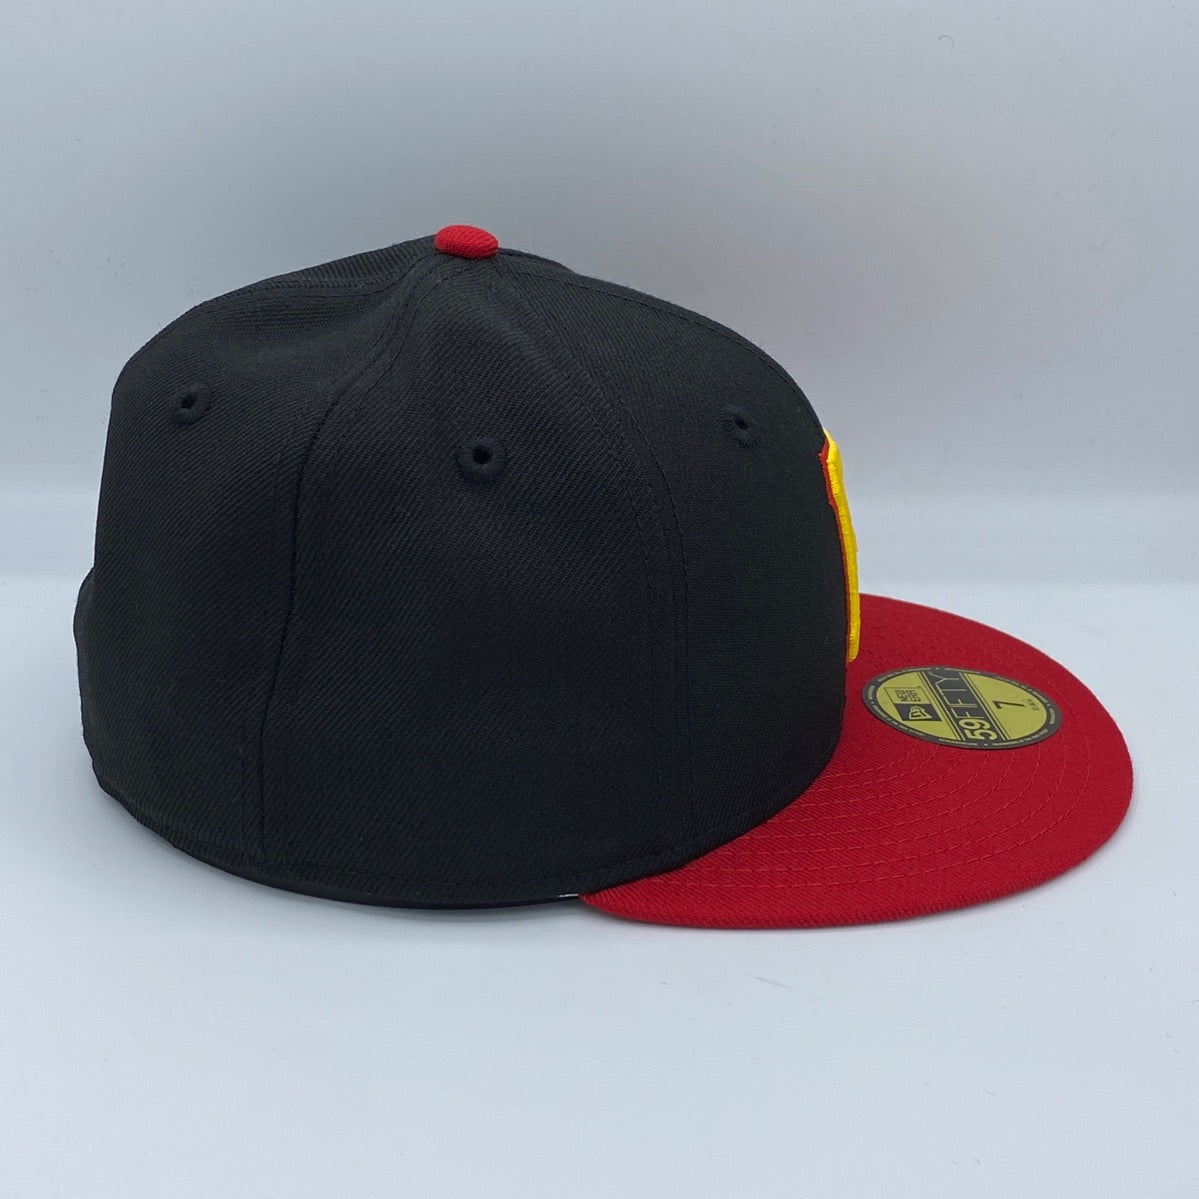 Black & Red Fitted Hats, Black & Red Baseball Caps